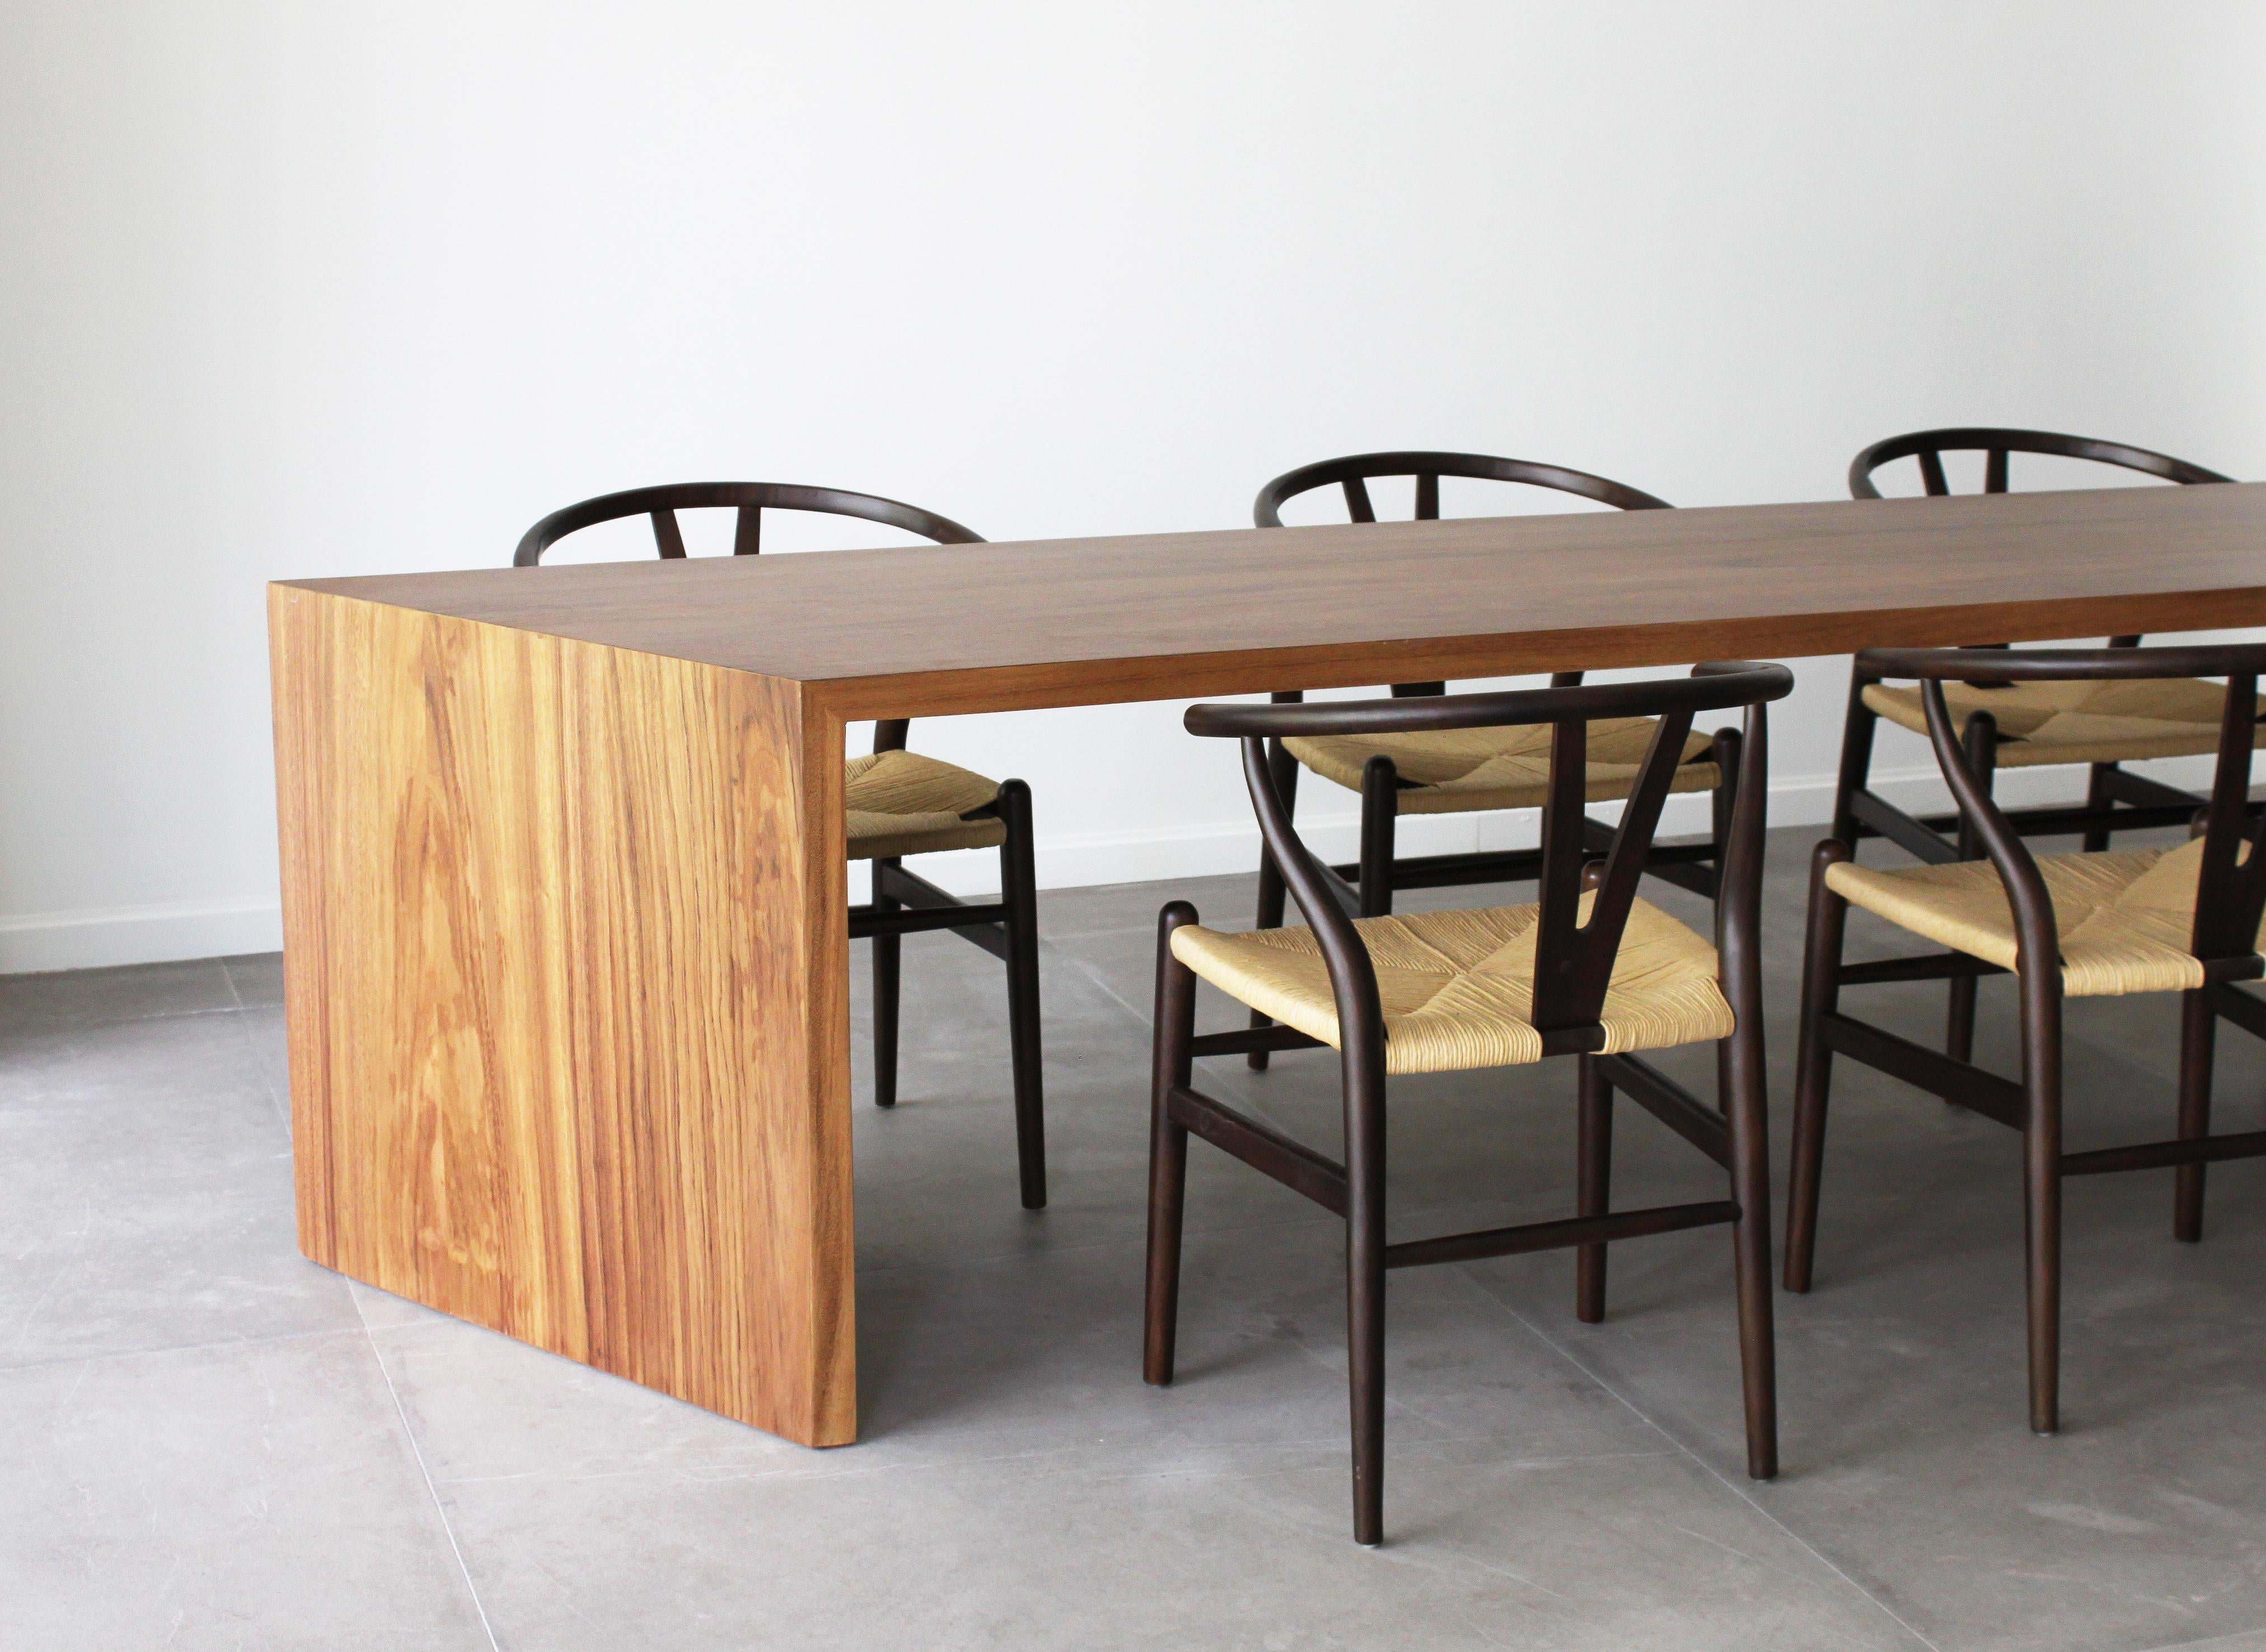 Mexican La Desviada Tall Table and Desk by Maria Beckmann, Represented by Tuleste Factor